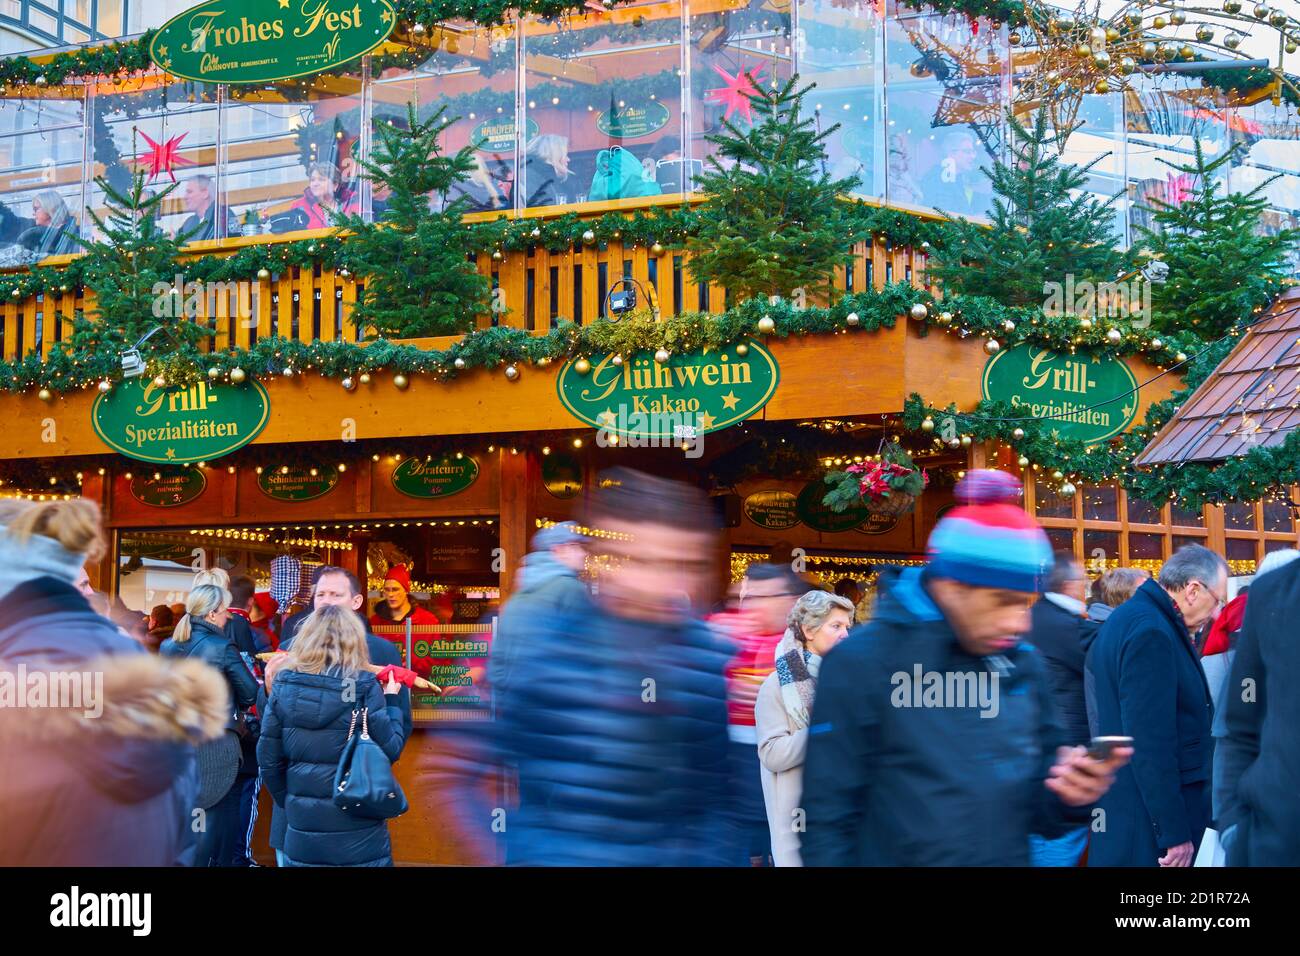 https://c8.alamy.com/comp/2D1R72A/hanover-germany-december-21-2019-people-in-front-of-the-big-mulled-wine-stand-at-the-christmas-market-2D1R72A.jpg